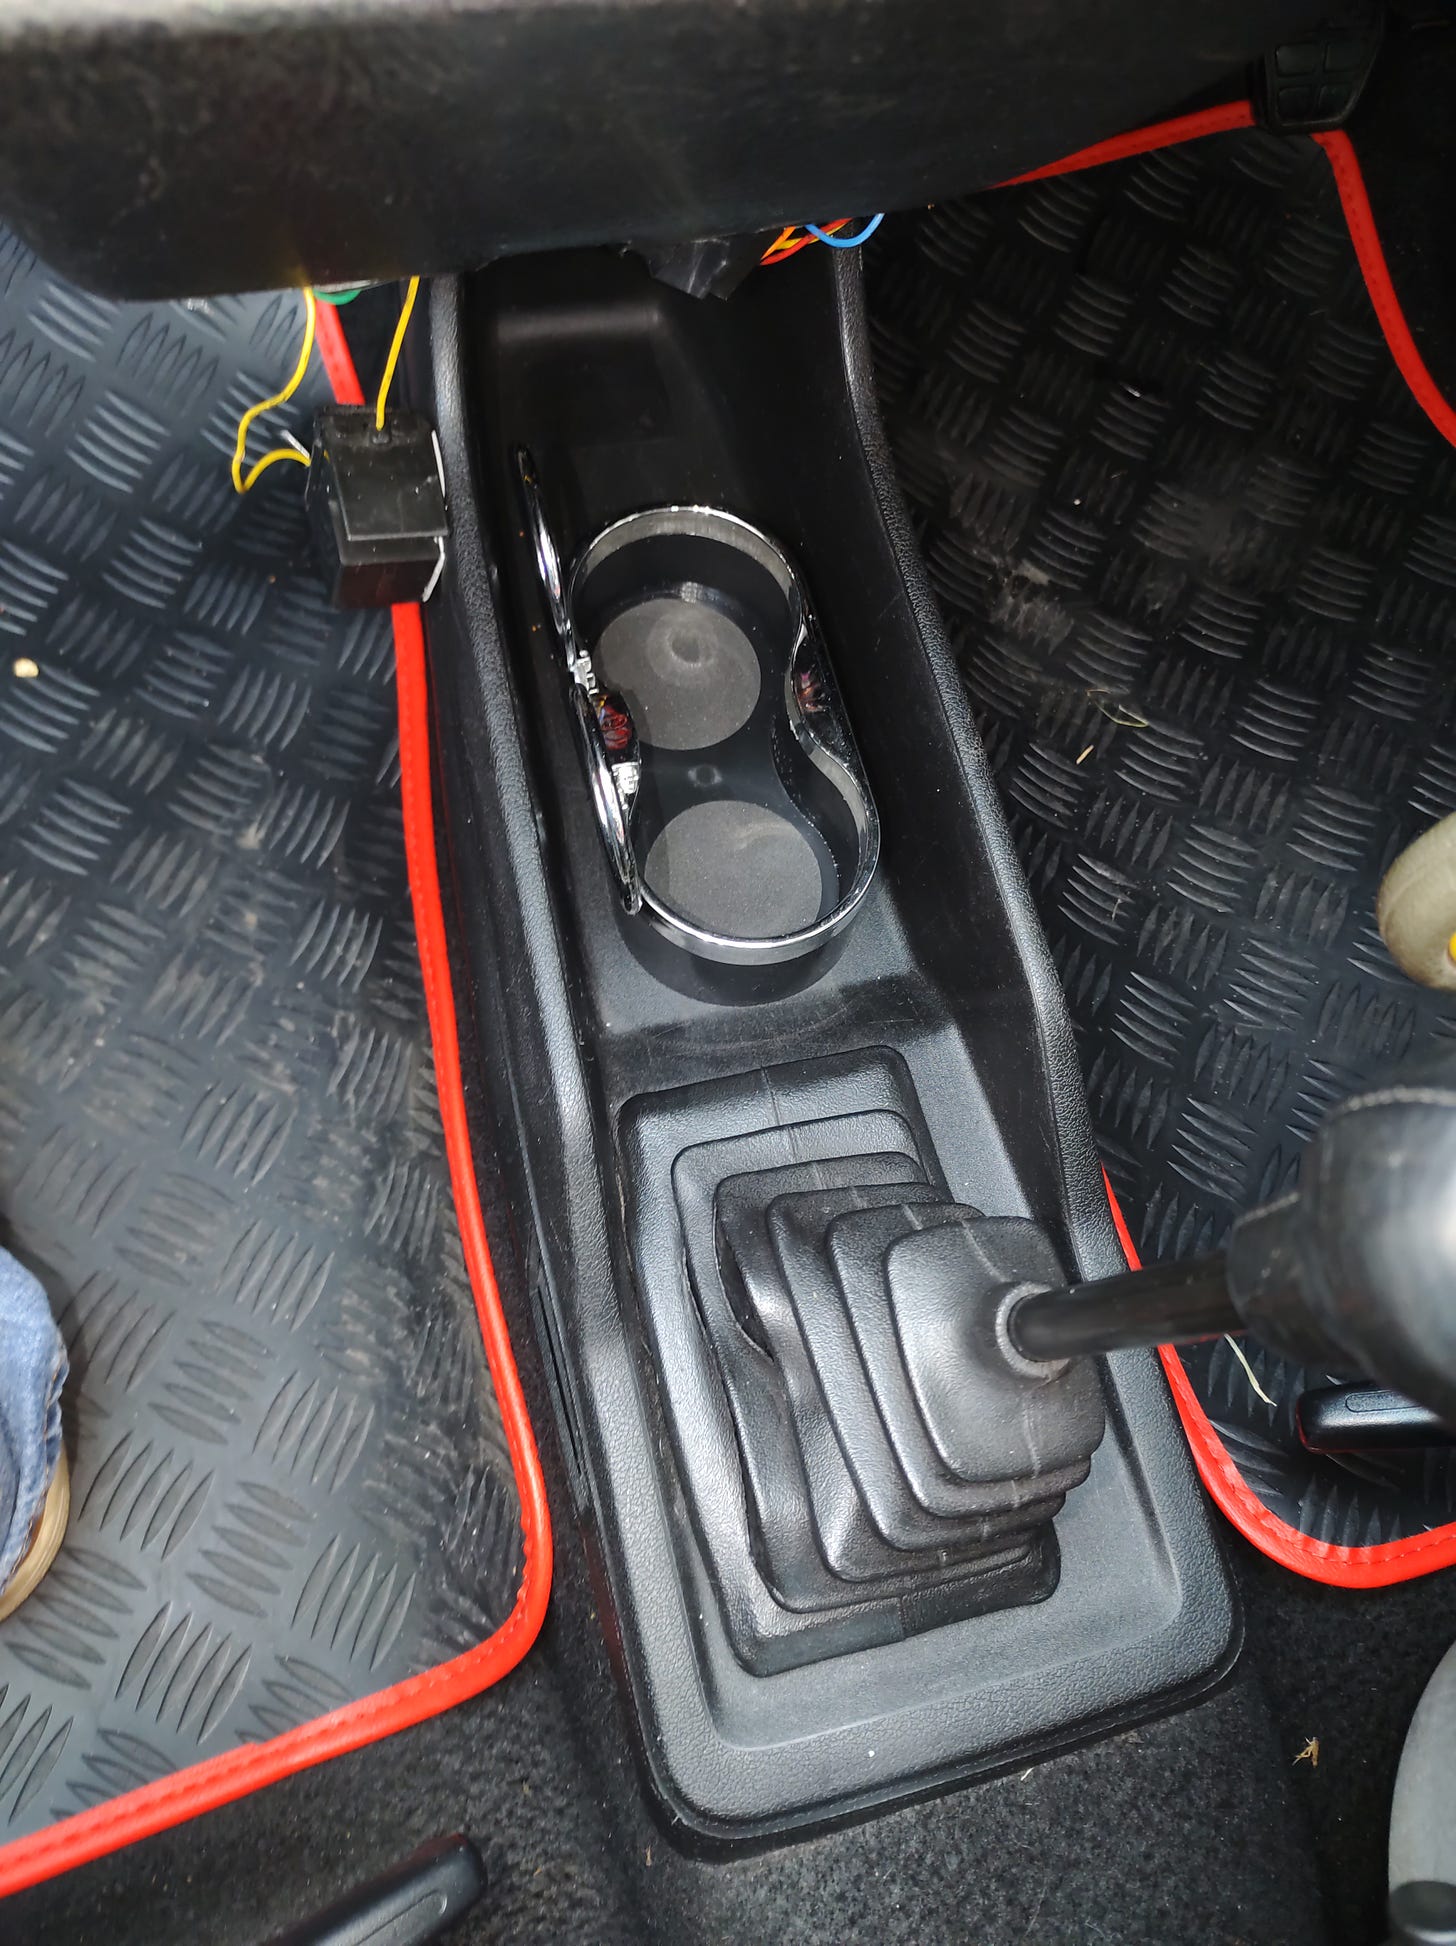 Cheap eBay cupholder installed in recess between gearstick and dashboard